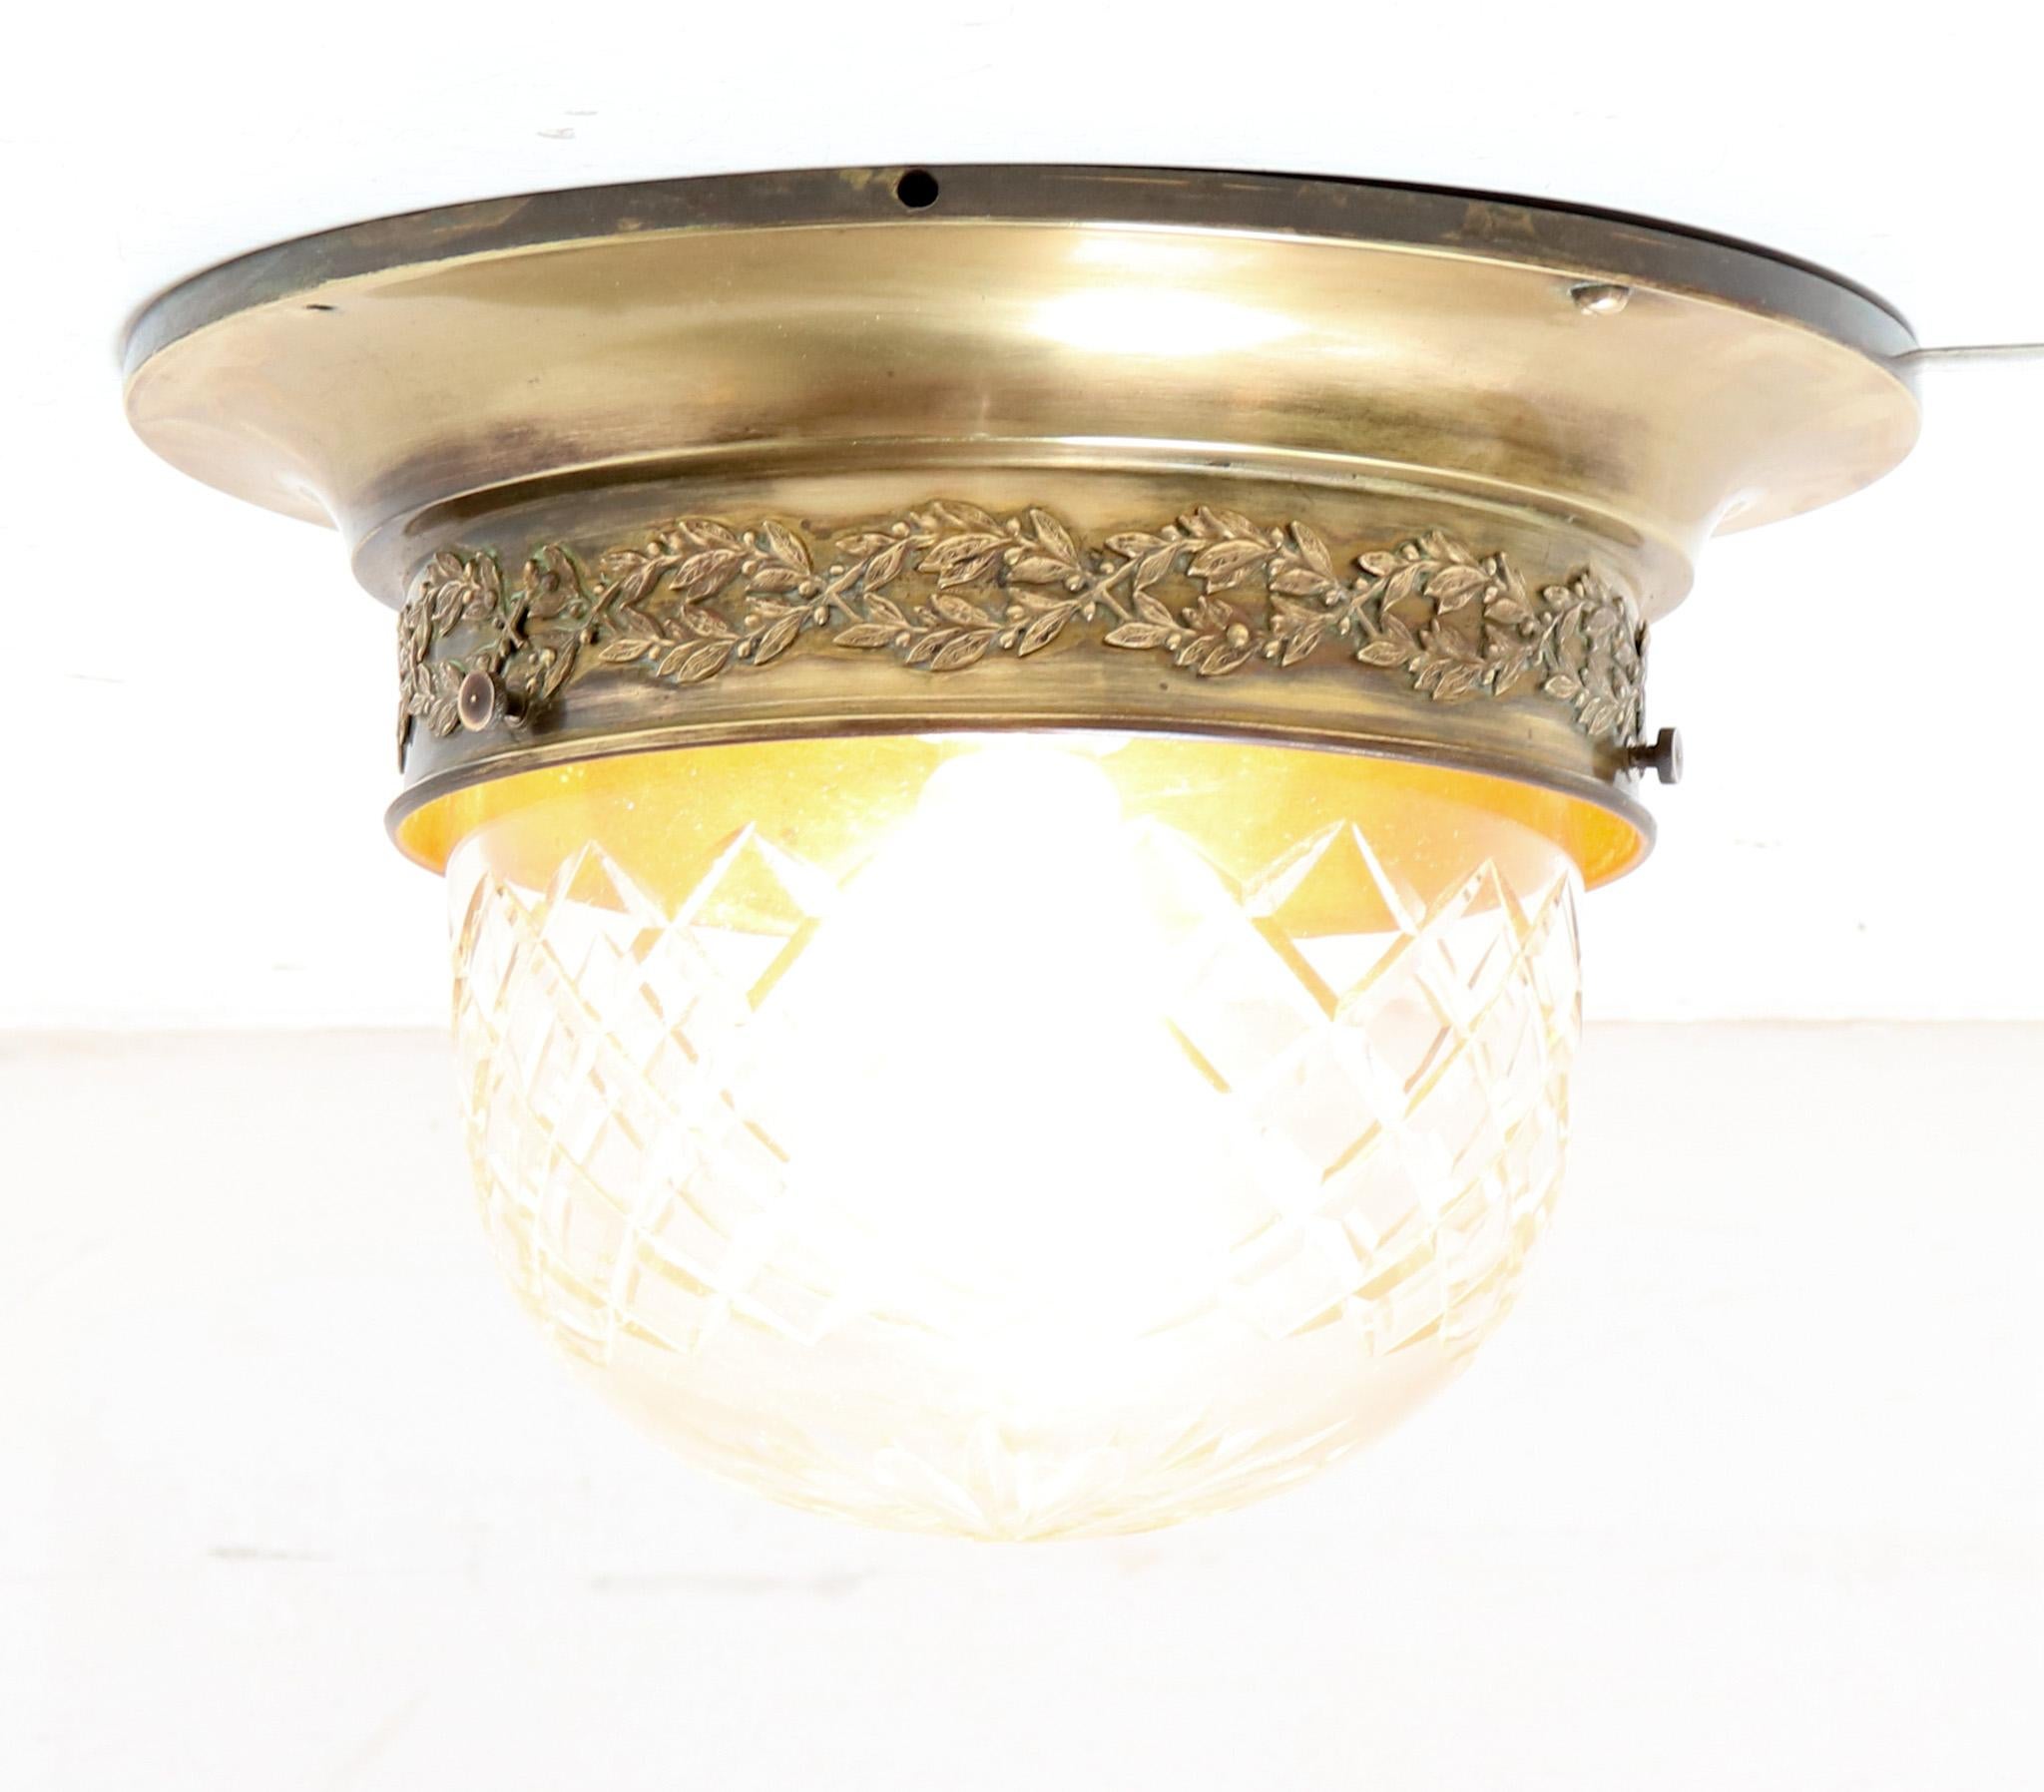 Stunning Art Nouveau flush mount ceiling light. Striking French design from the 1900s. Original patinated brass frame with original hand blown cut glass shade. Rewired with one original socket for E-27 light bulb. This wonderful Art Nouveau flush